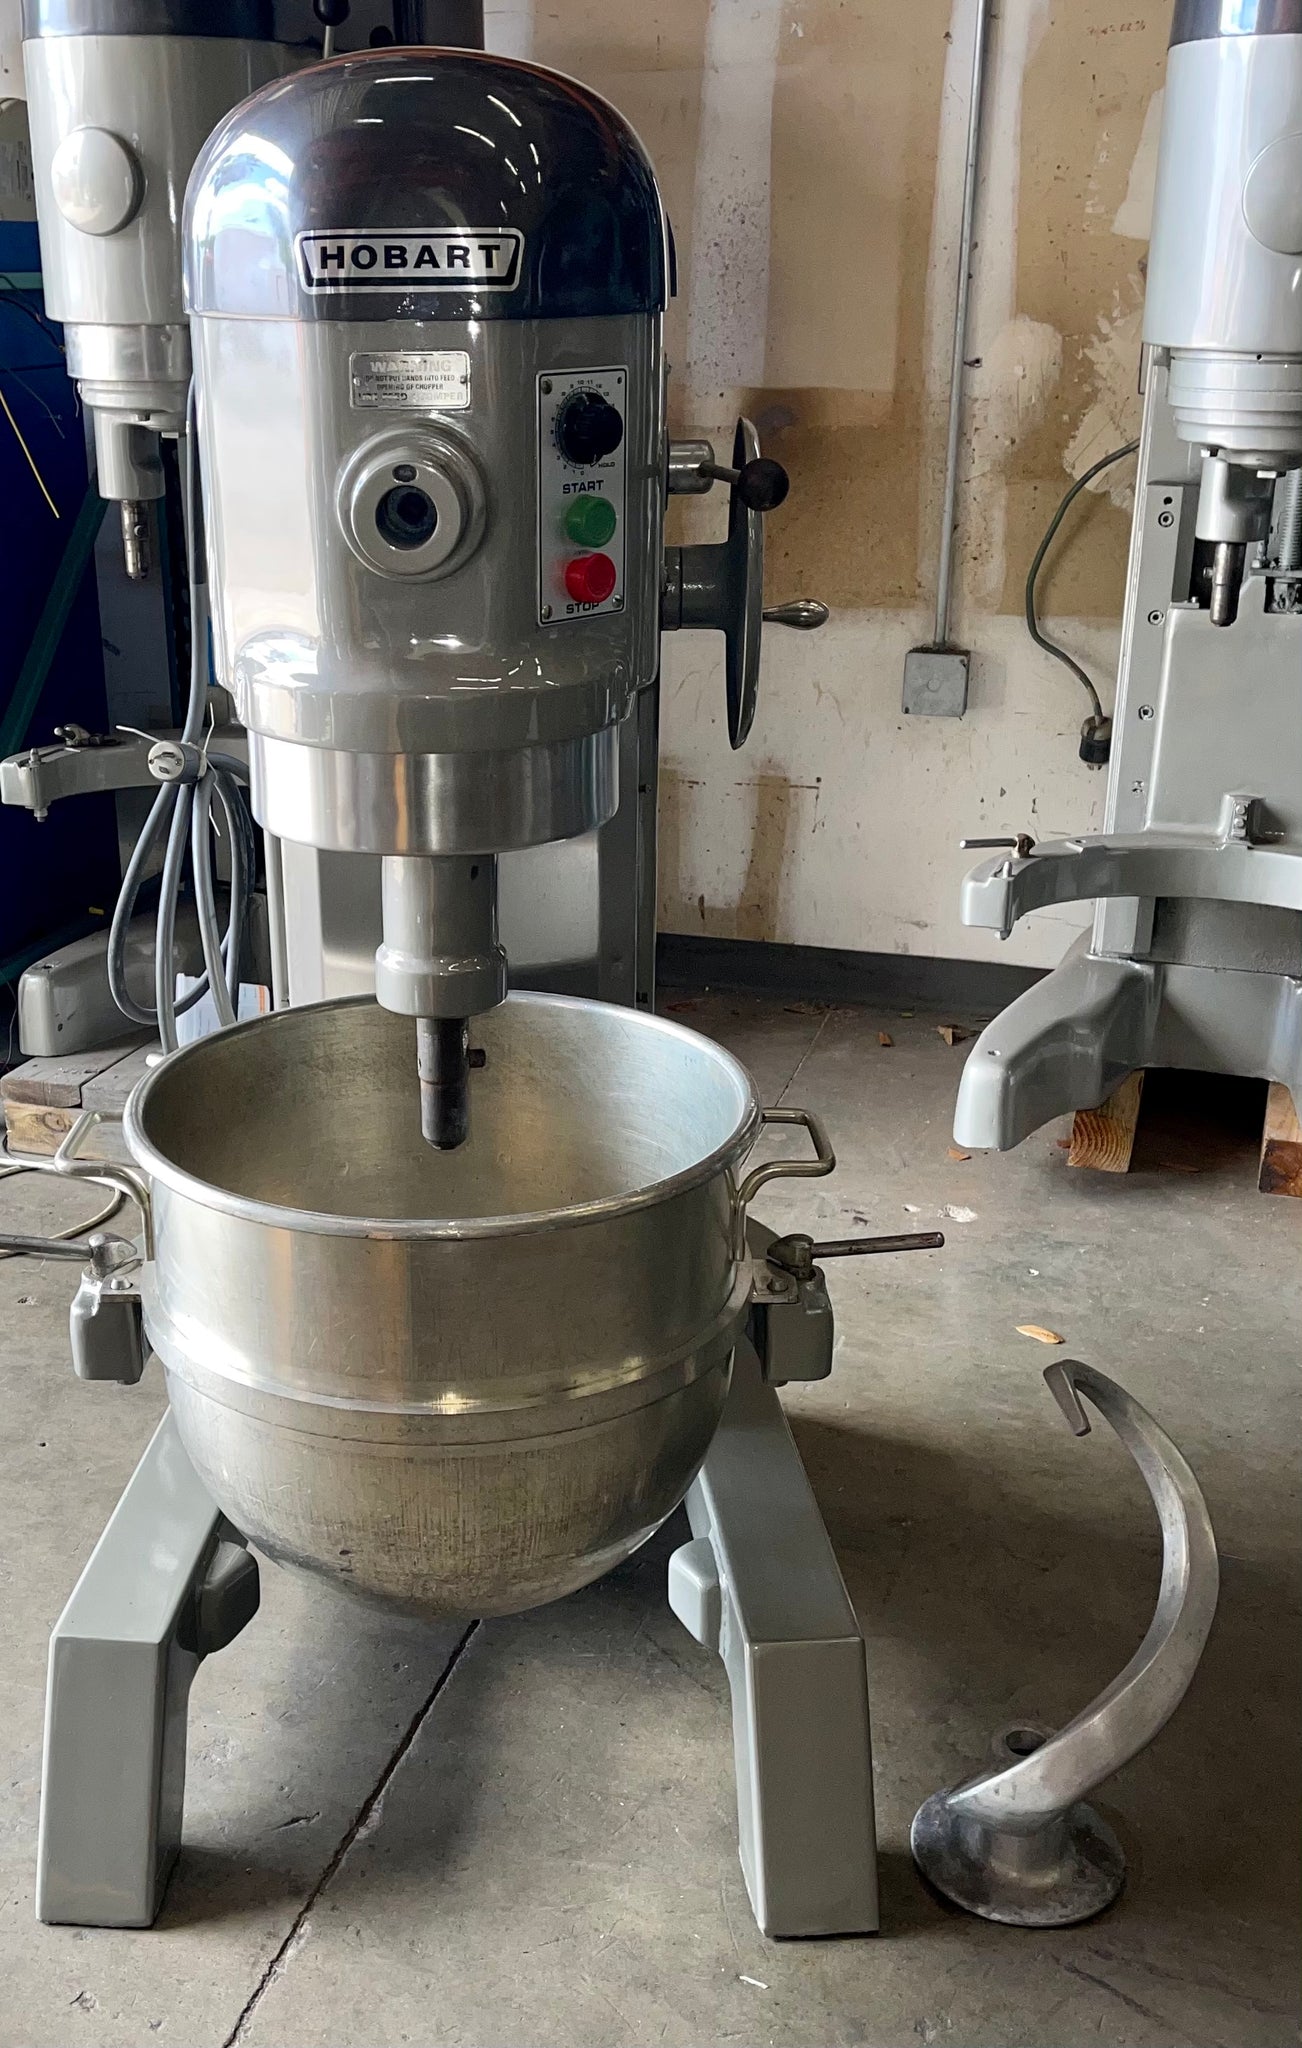 Hobart 1 phase H600 60 qt mixer comes with stainless steel bowl and one attachment